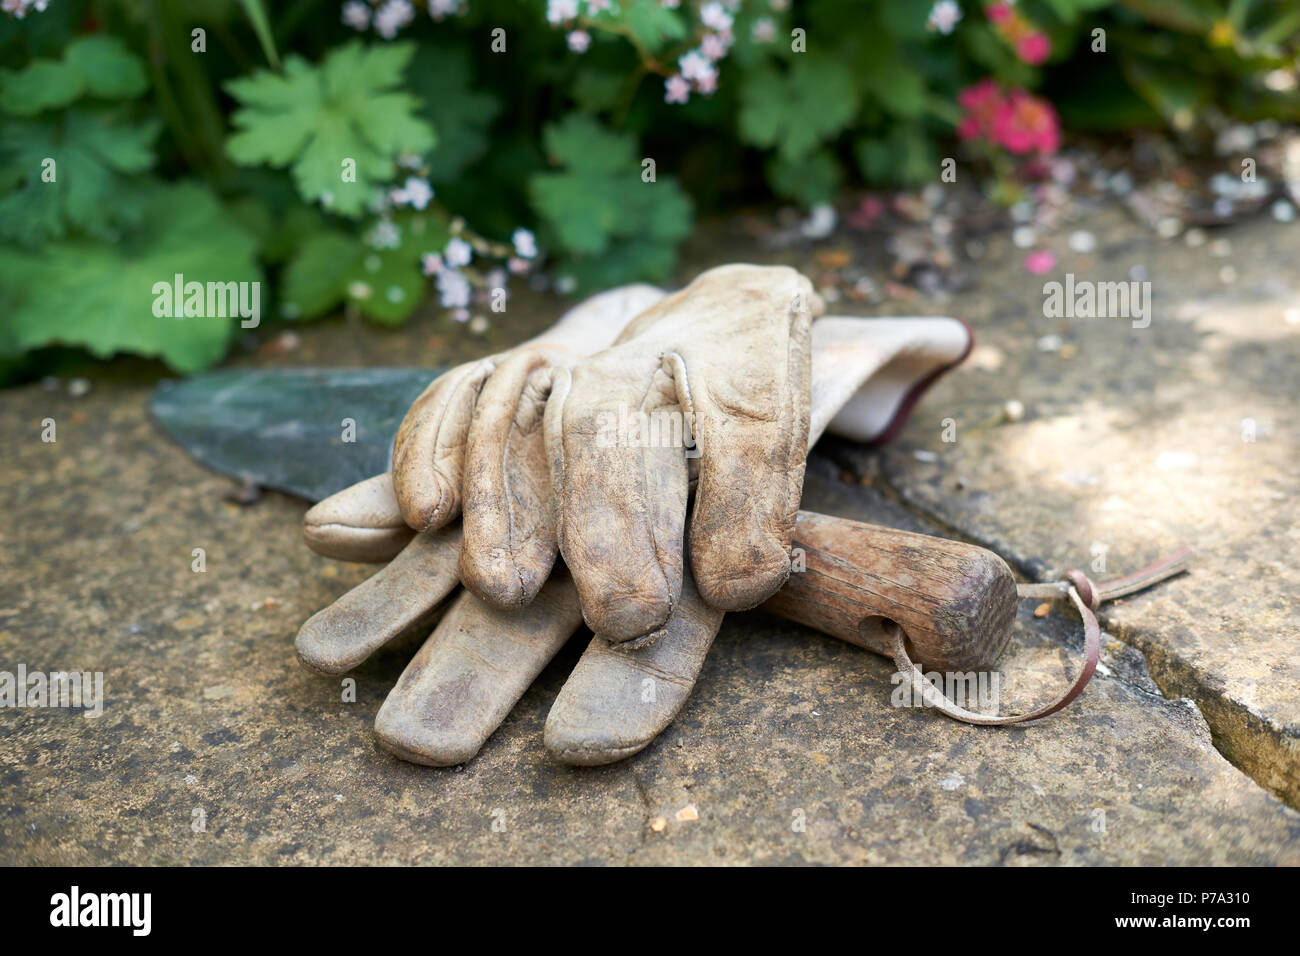 Leather gardening gloves and a wooden handled gardening trowel on a garden wall in Summer, UK. Stock Photo